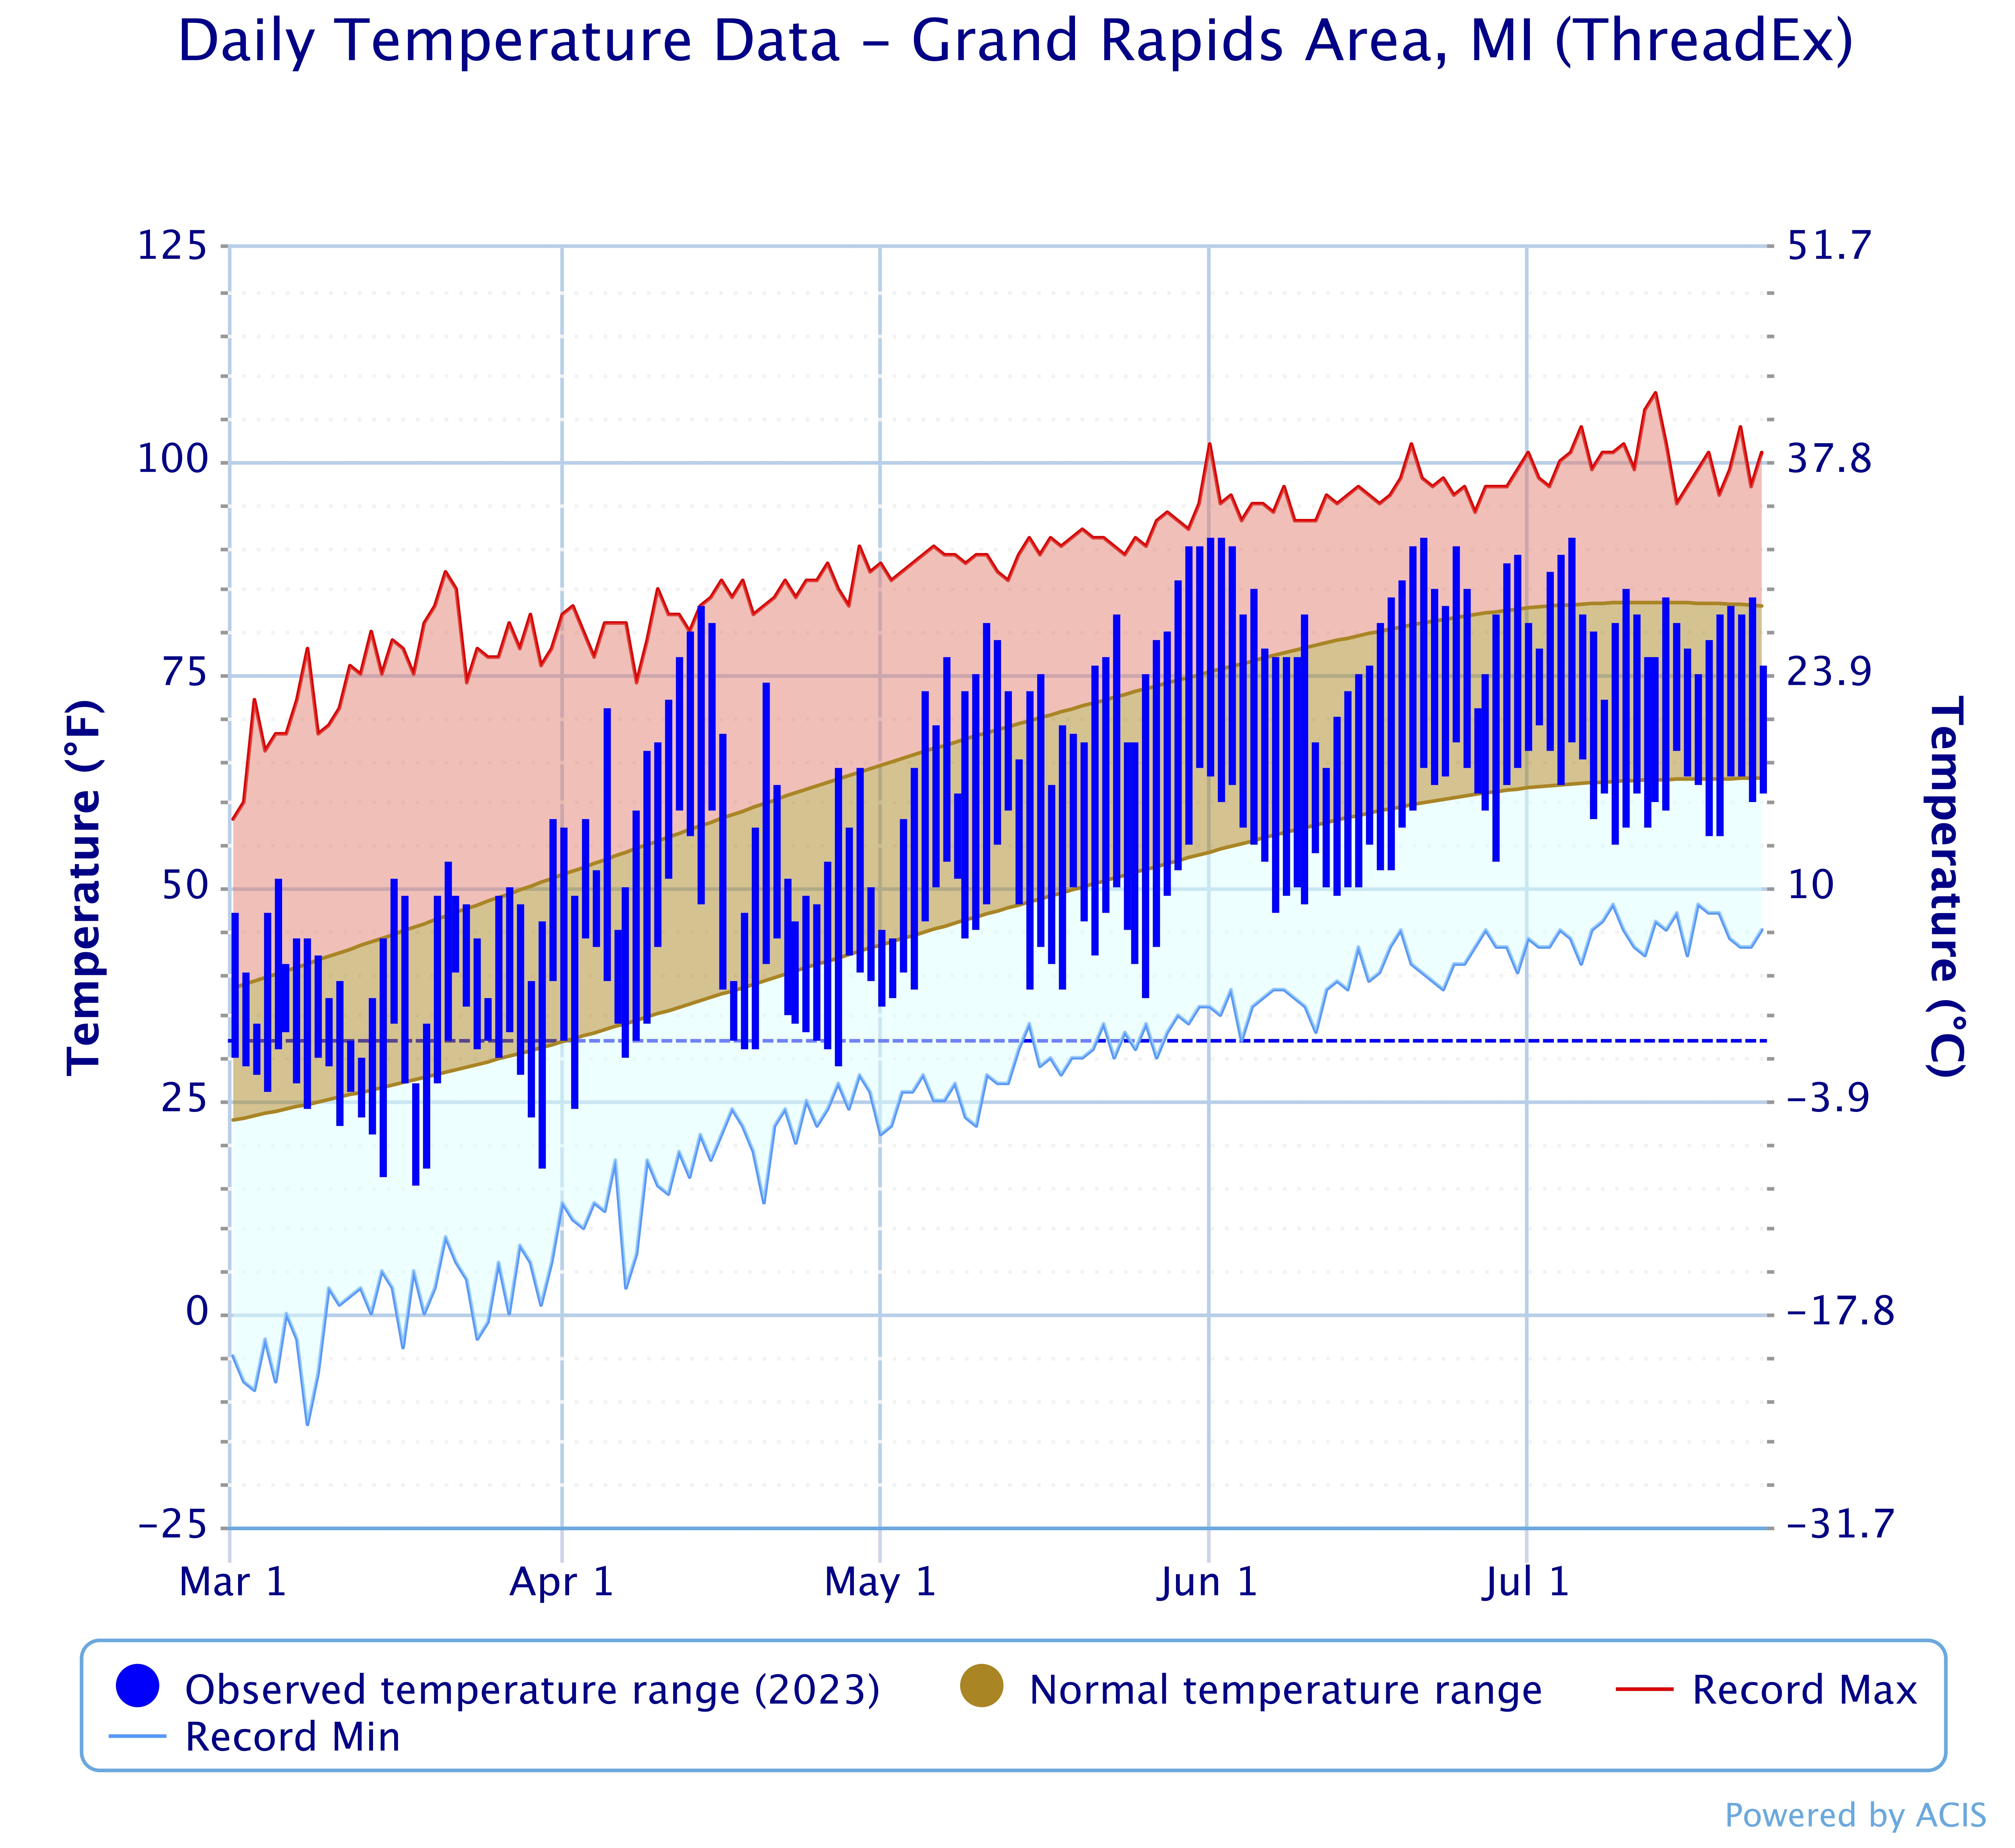 Daily temperature chart from March 1-July 23, 2023 with average low and high temperatures.